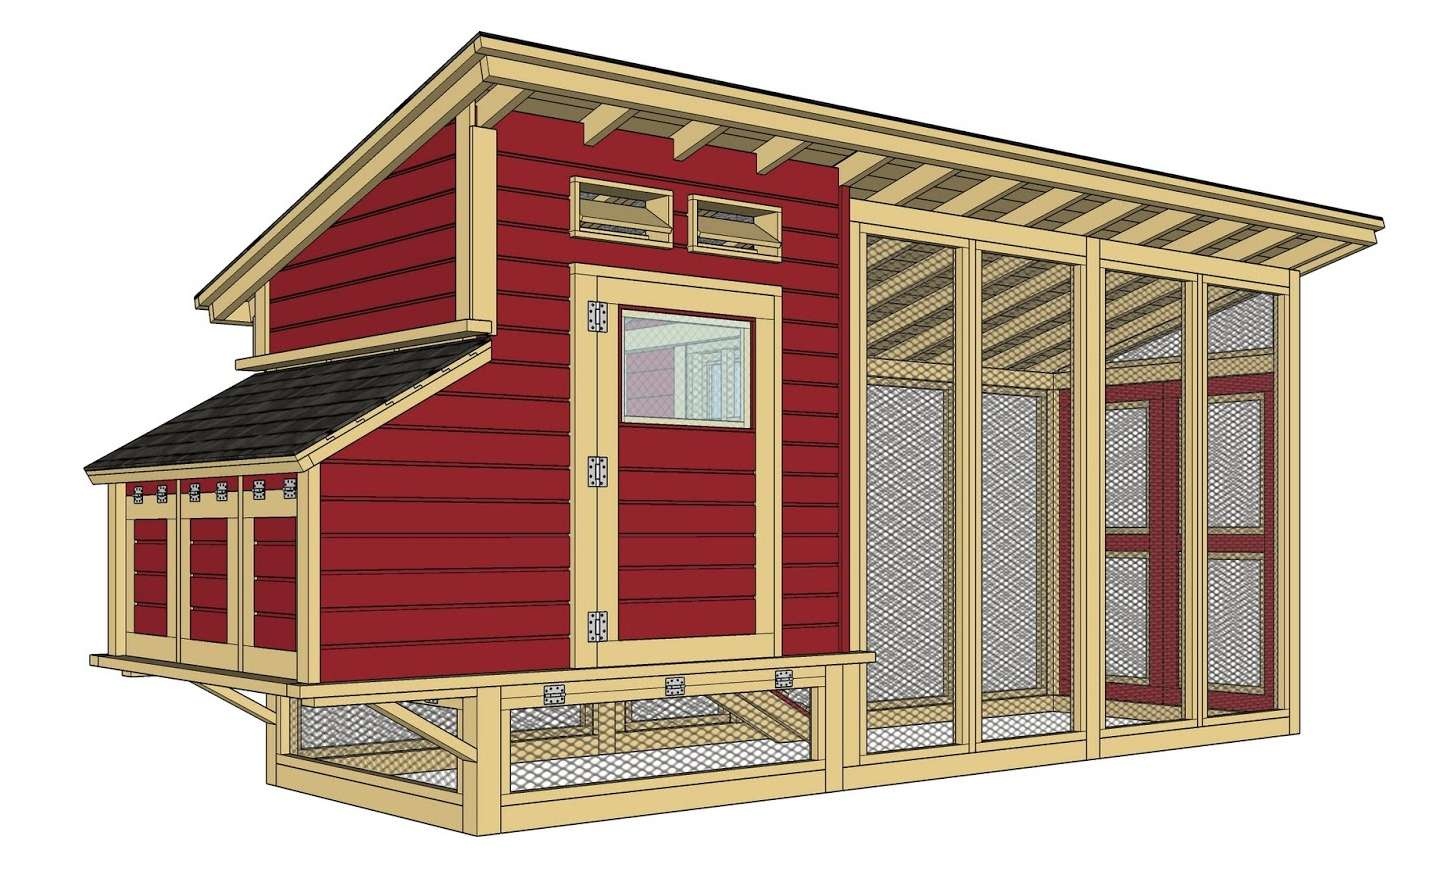 13 Free Chicken Coop Plans You Can Diy This Weekend - Free Printable Chicken Coop Plans